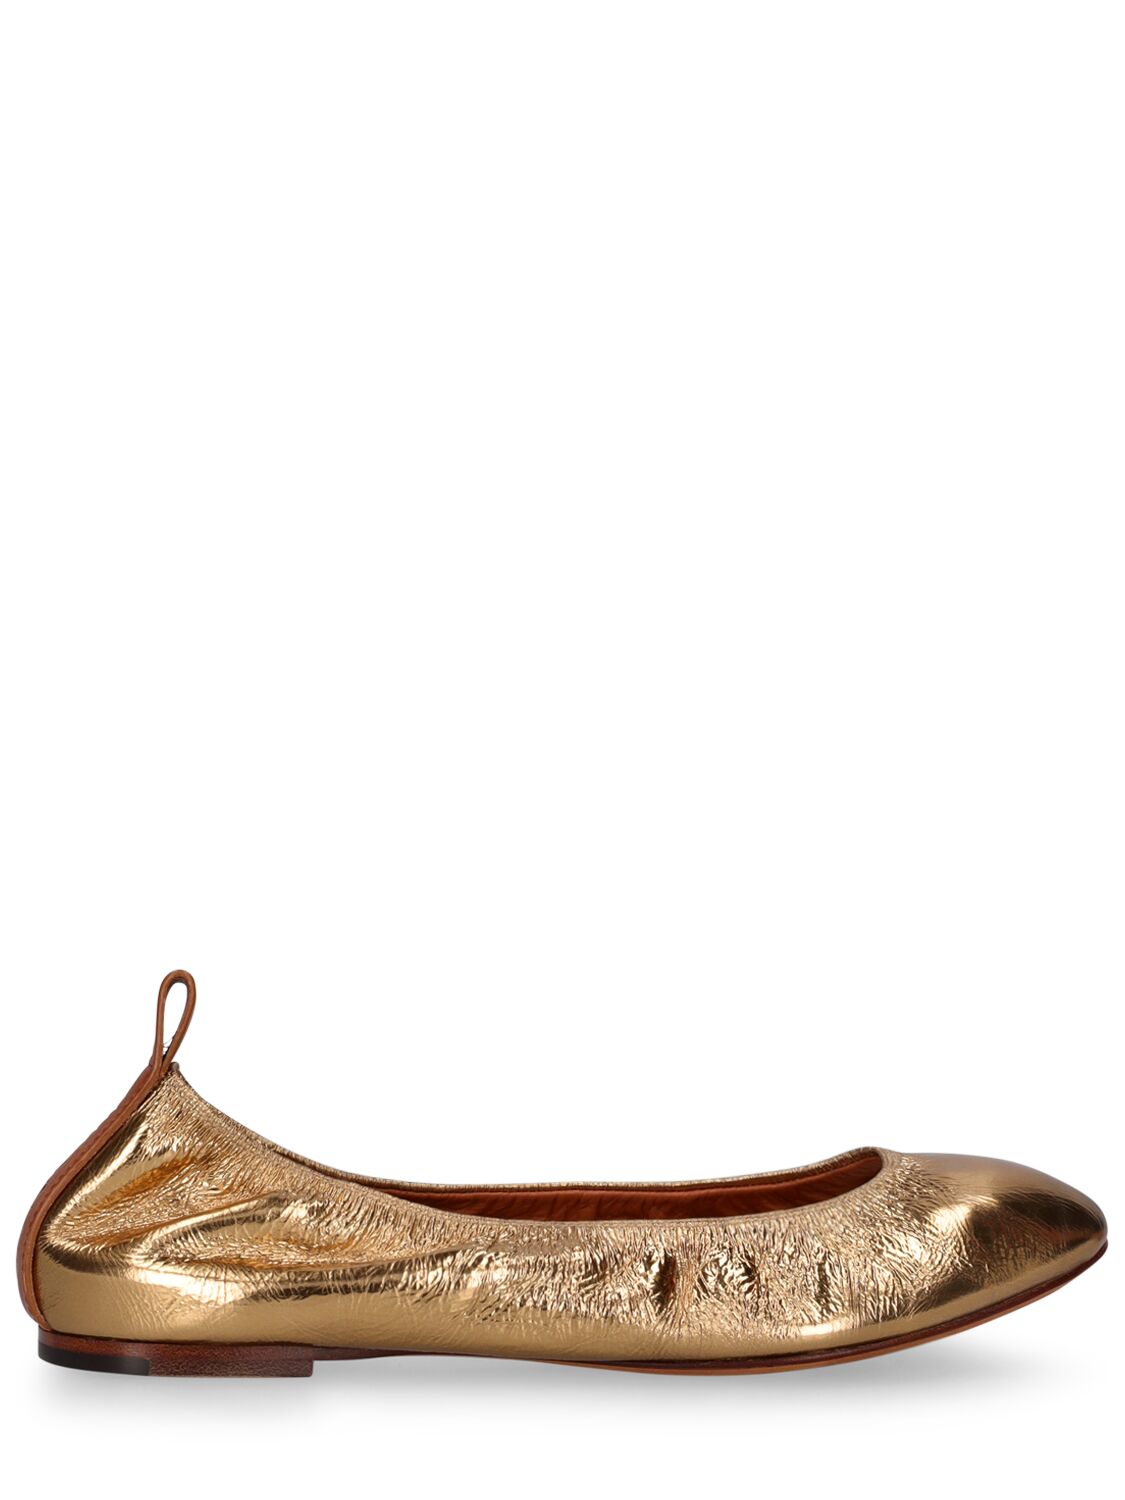 Lanvin Laminated Leather Ballerina Flats In Gold